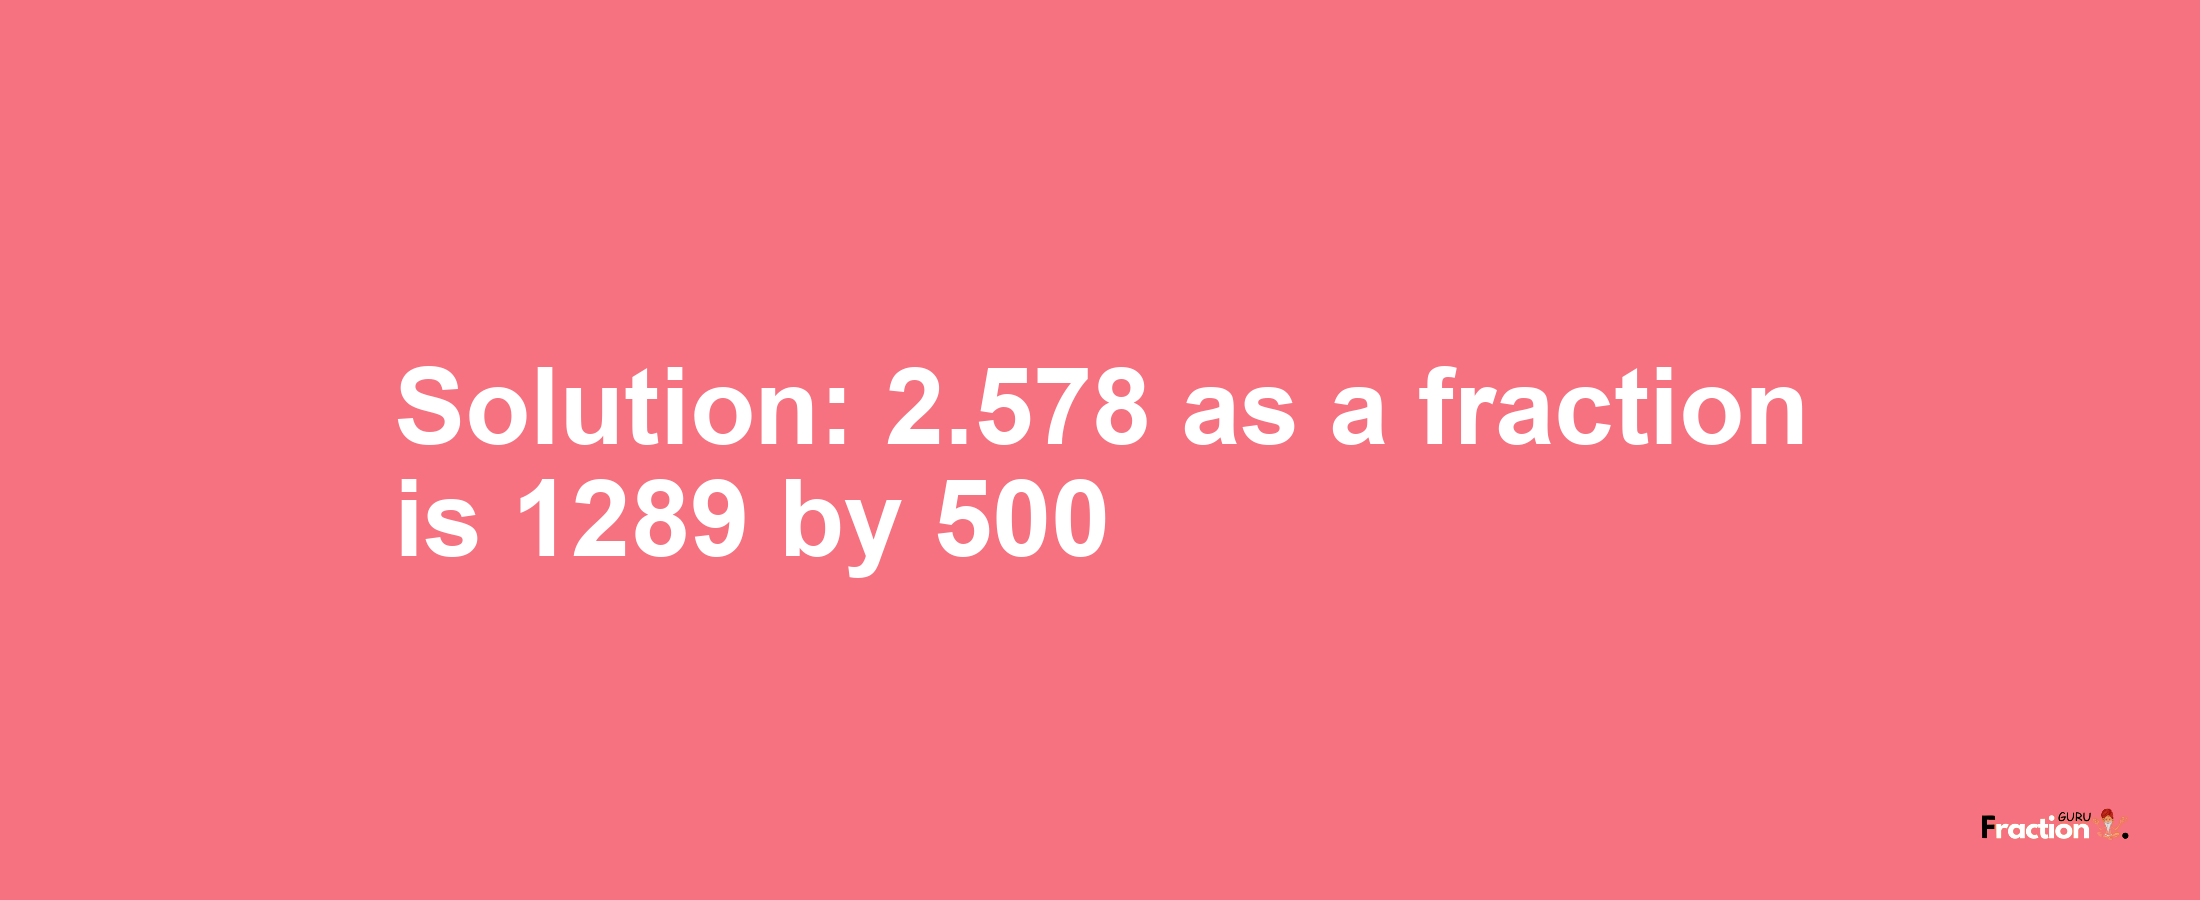 Solution:2.578 as a fraction is 1289/500